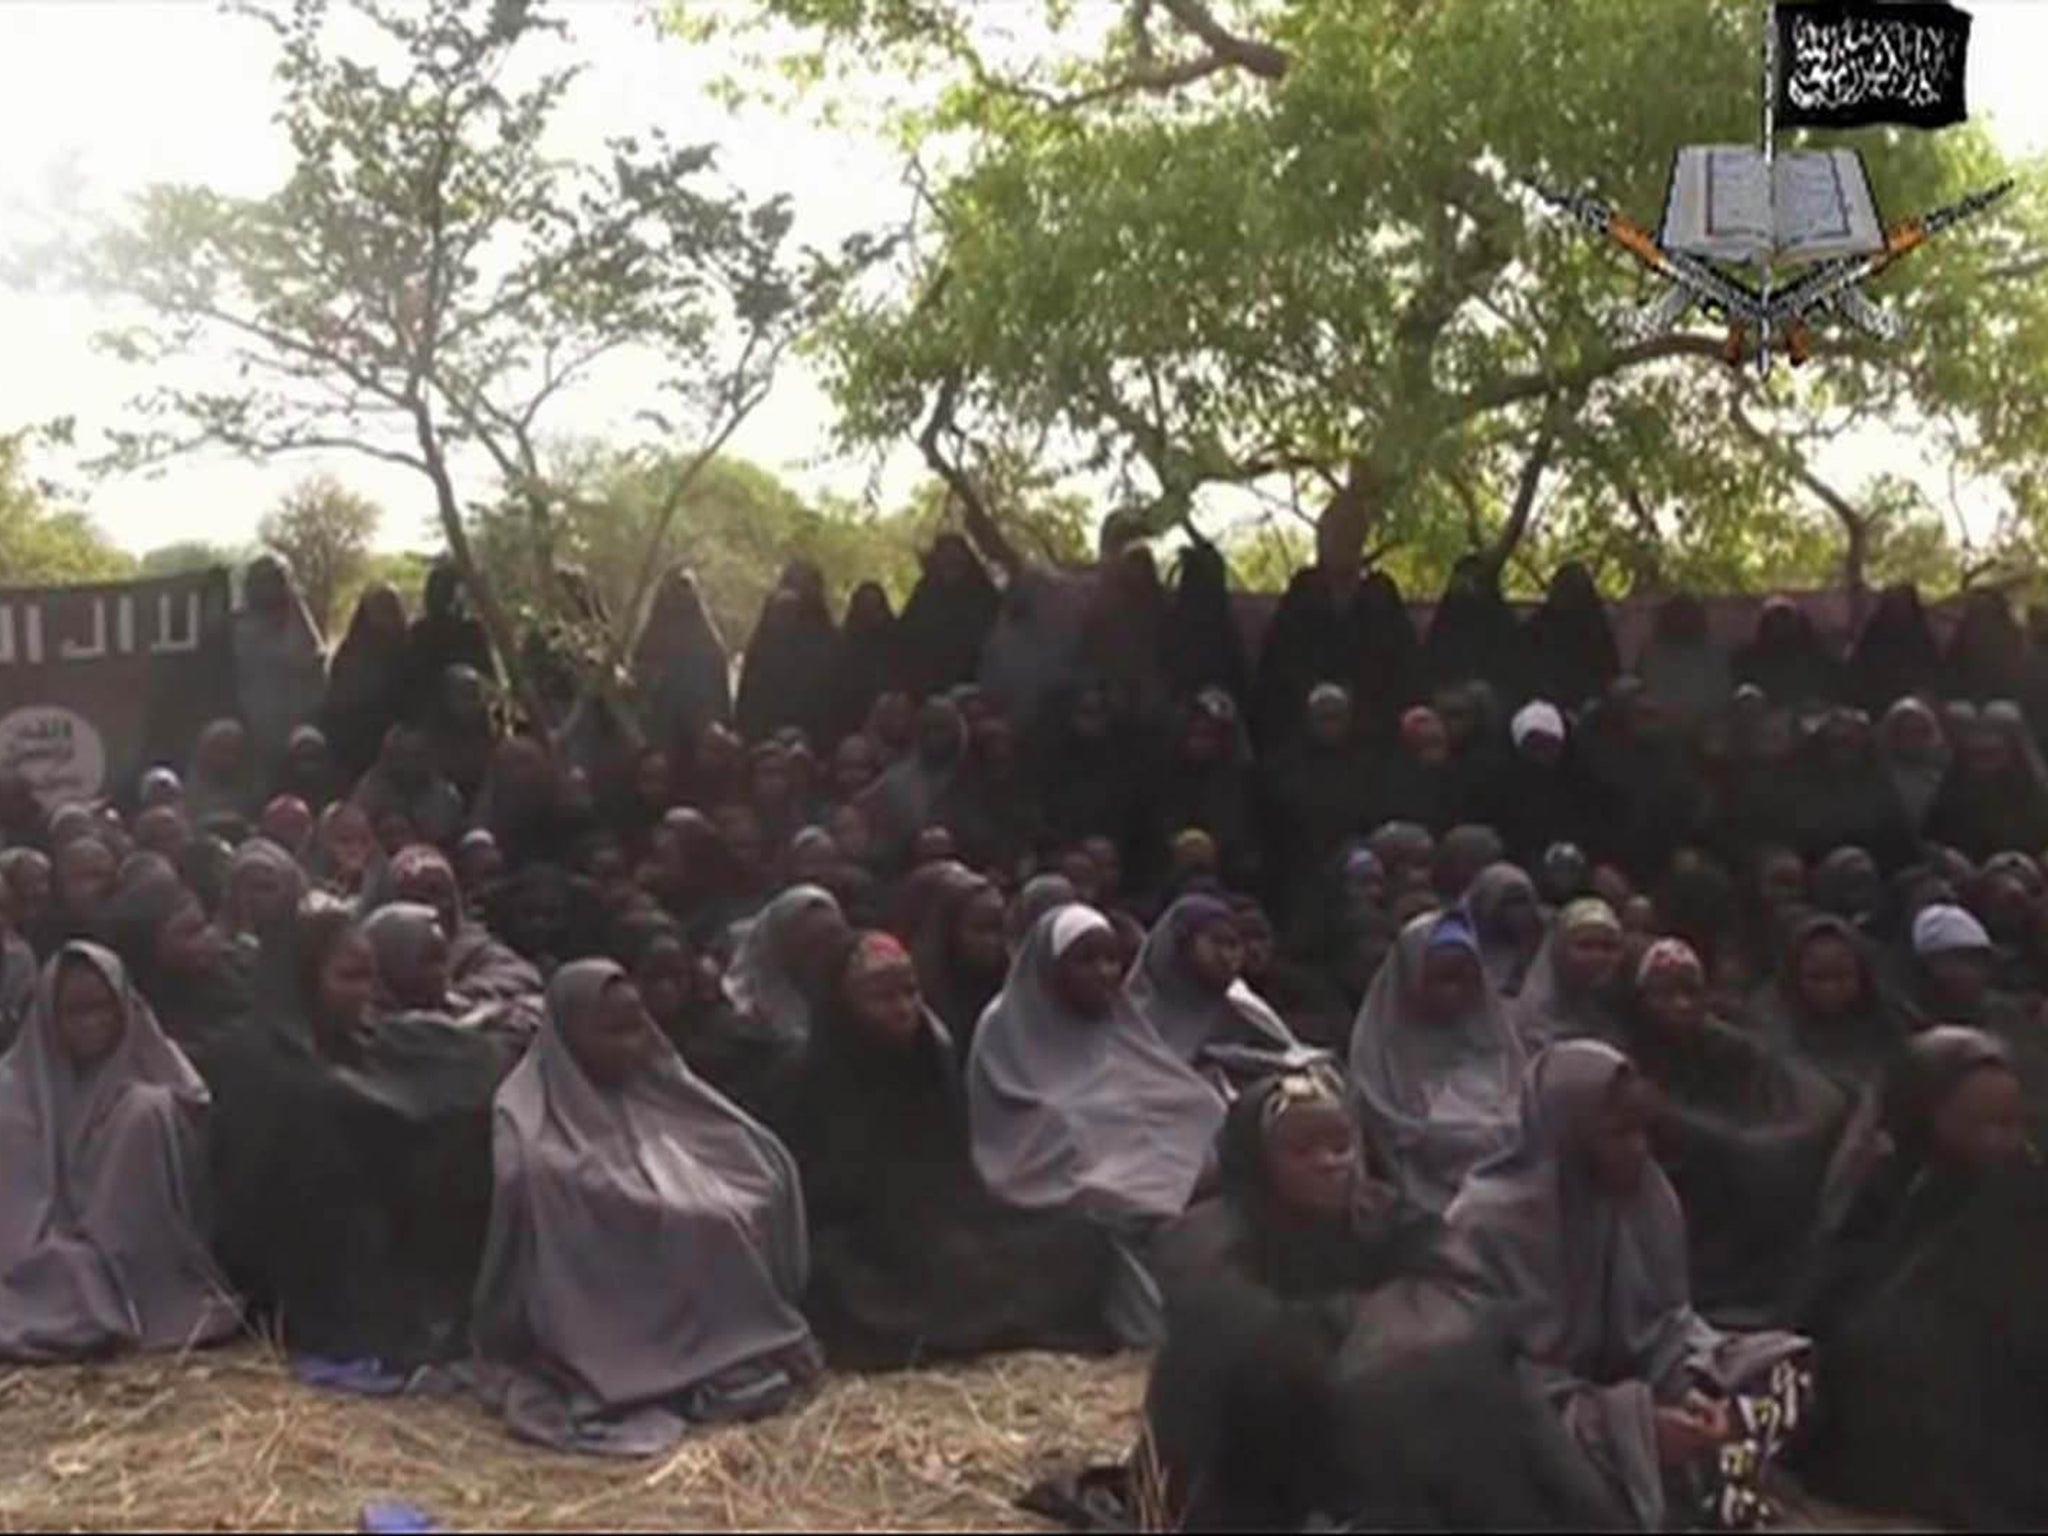 The girls were abducted from the Nigerian town of Chibok back in April